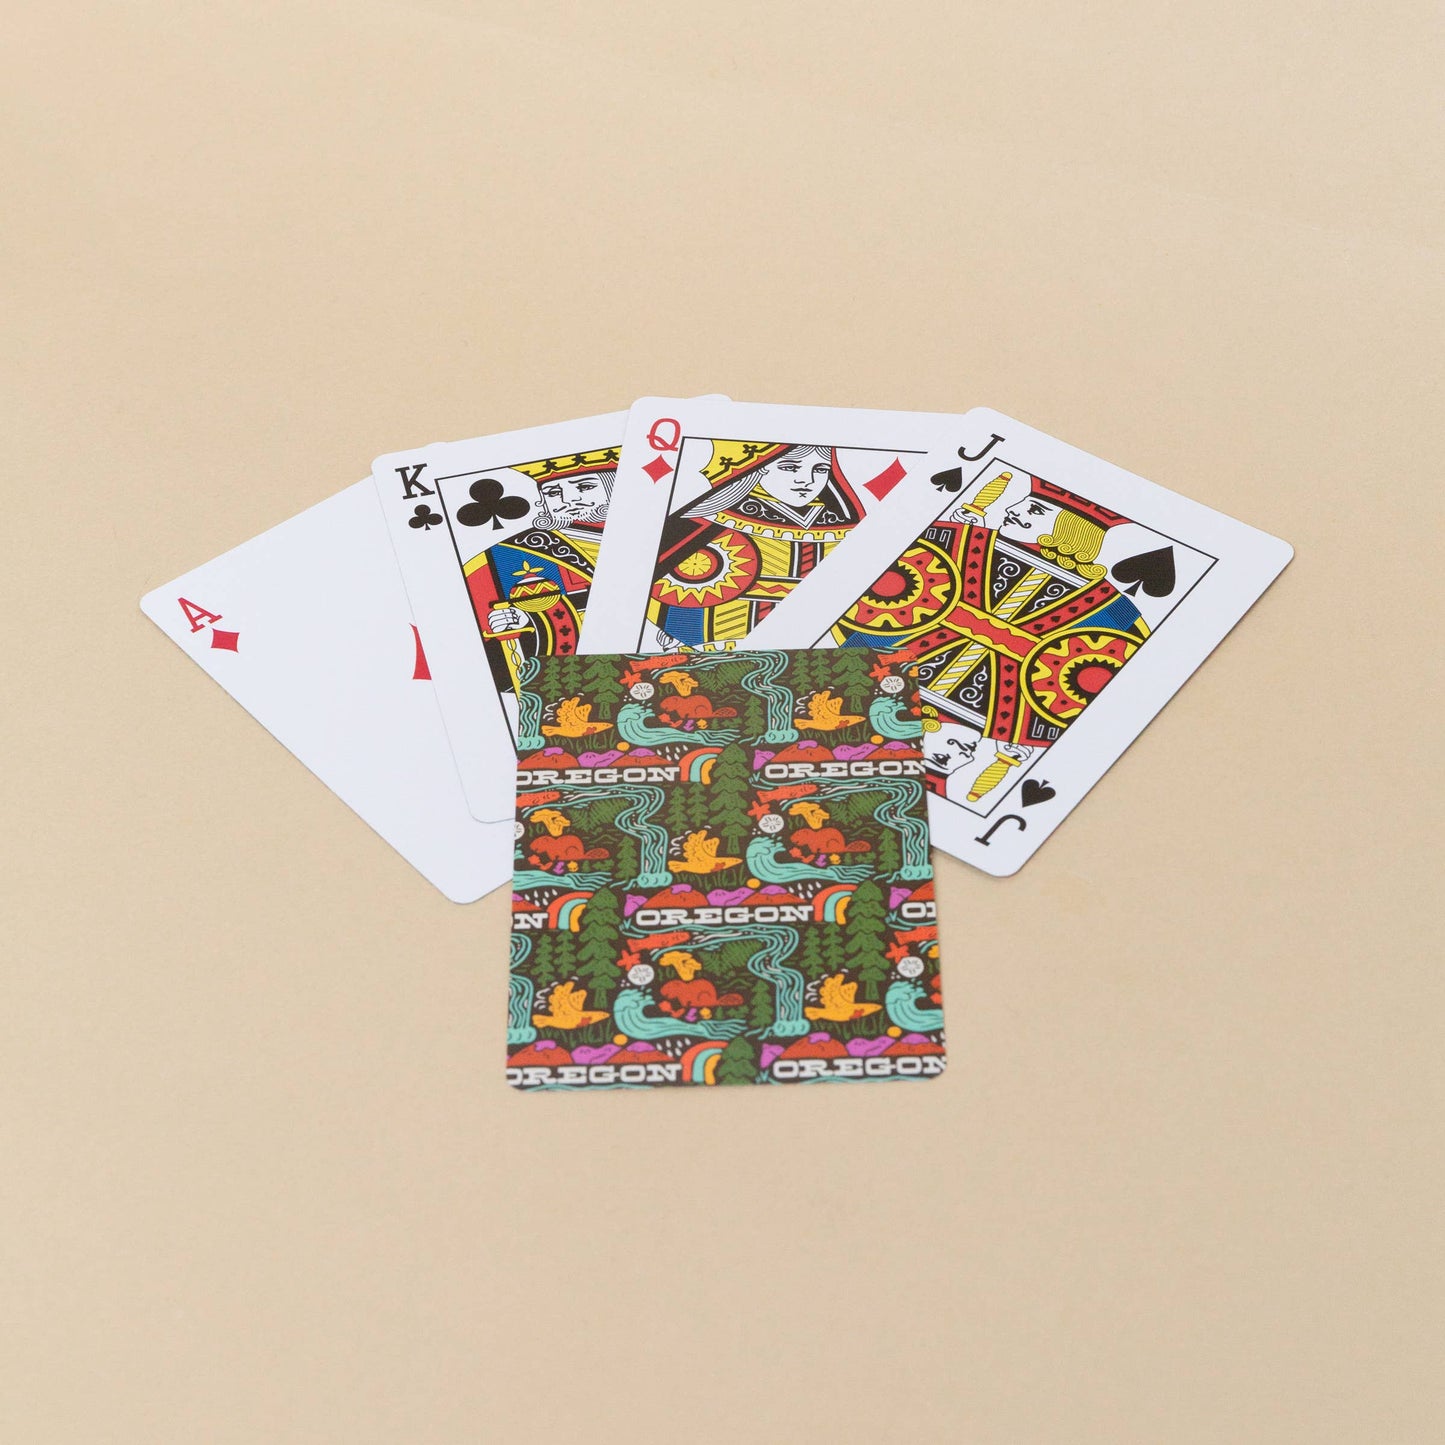 Tender Loving Empire - Oregon Adventures Playing Cards